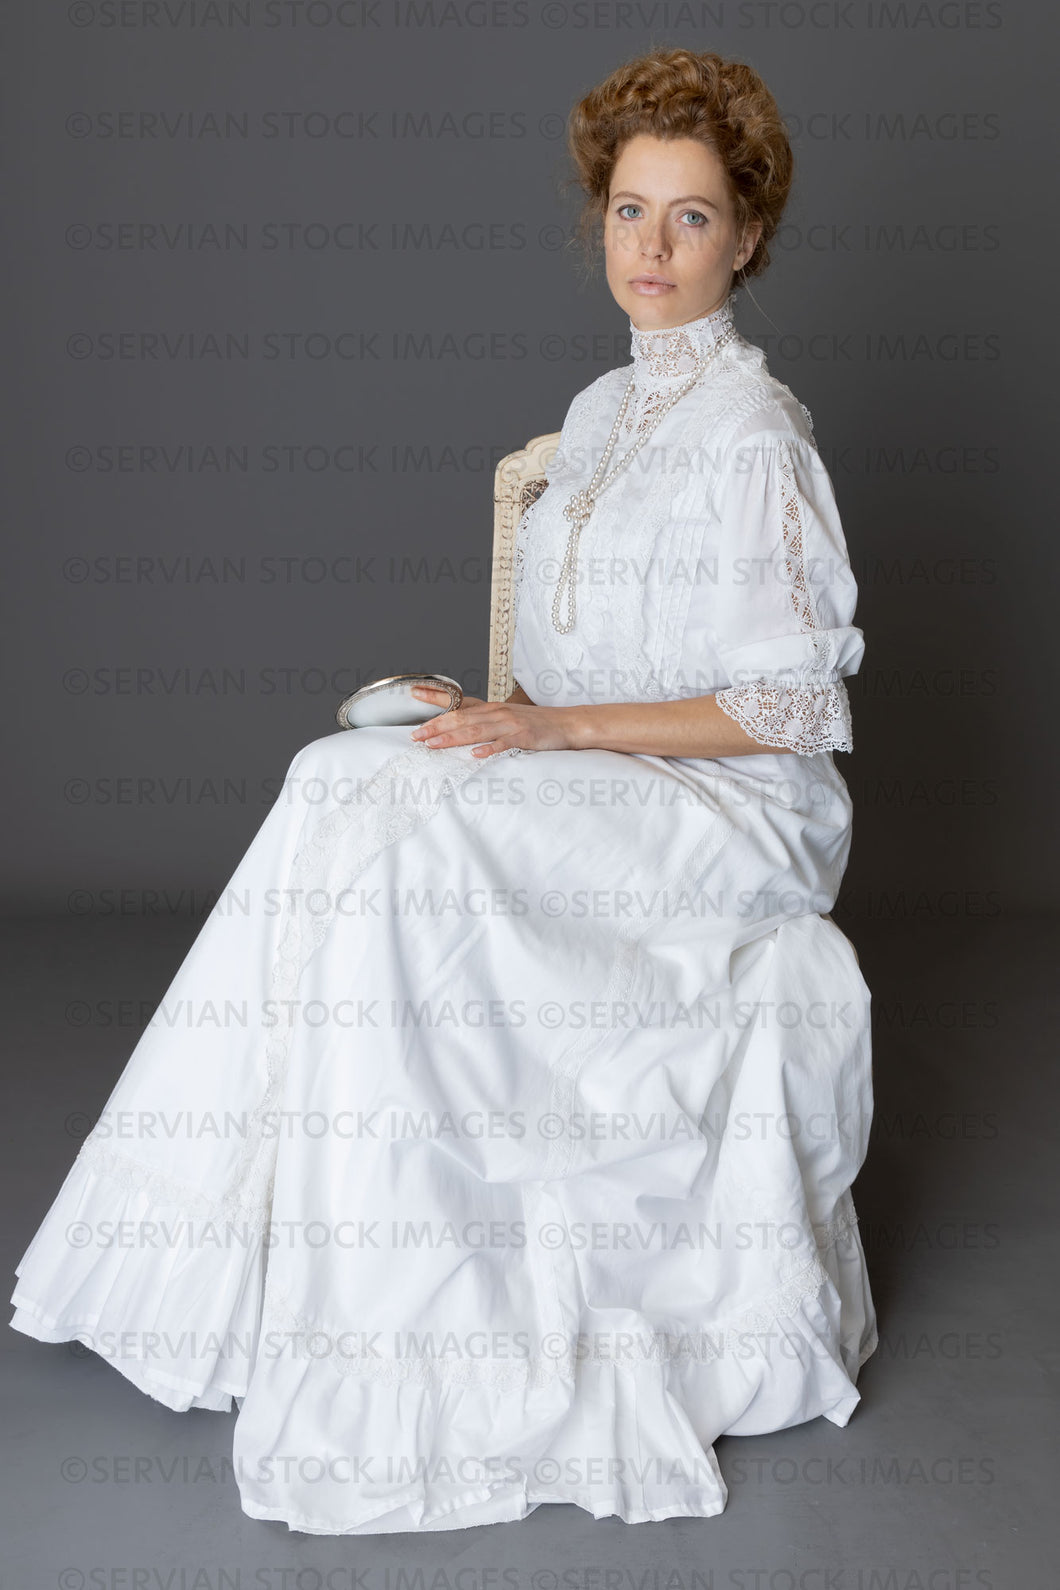 Edwardian woman in a white lace blouse and skirt with a pearl necklace (Anastasiya 4870)